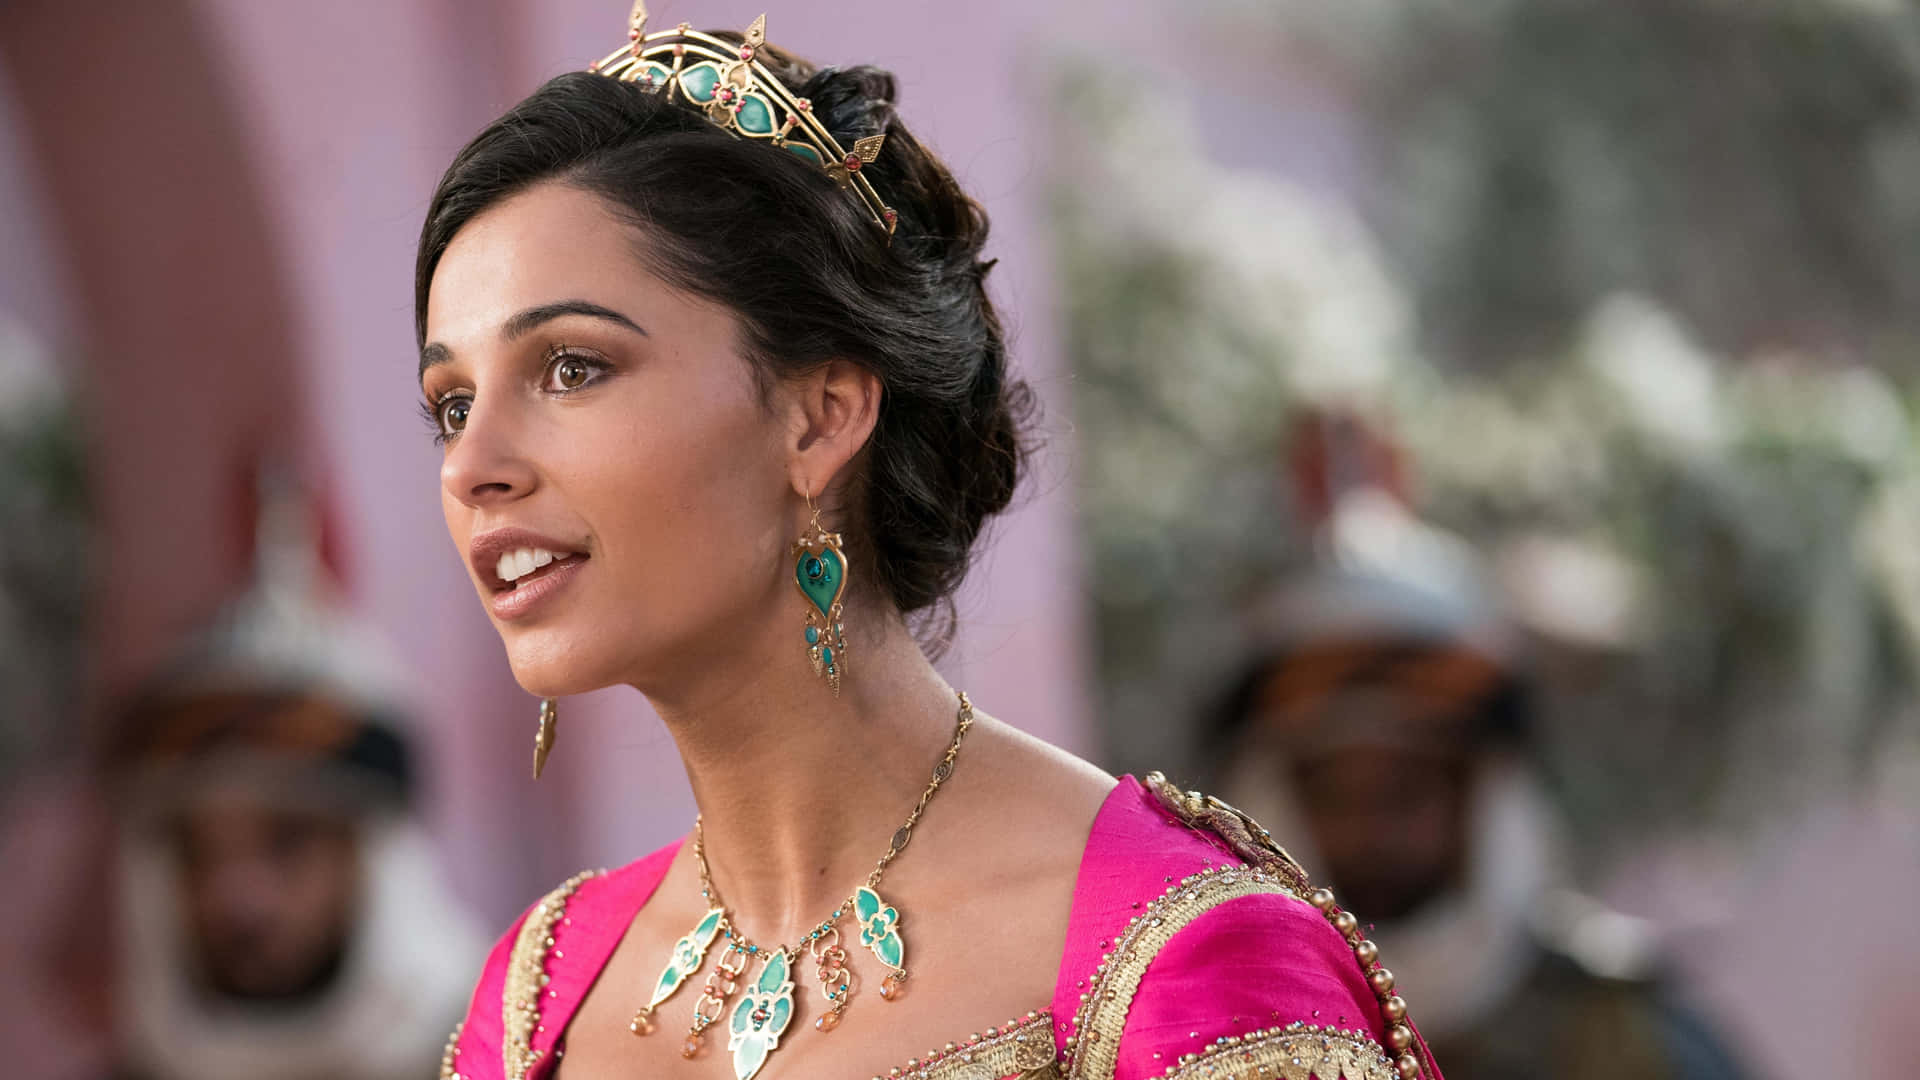 Follow Aladdin's thrilling journey as he discovers love, power and courage.